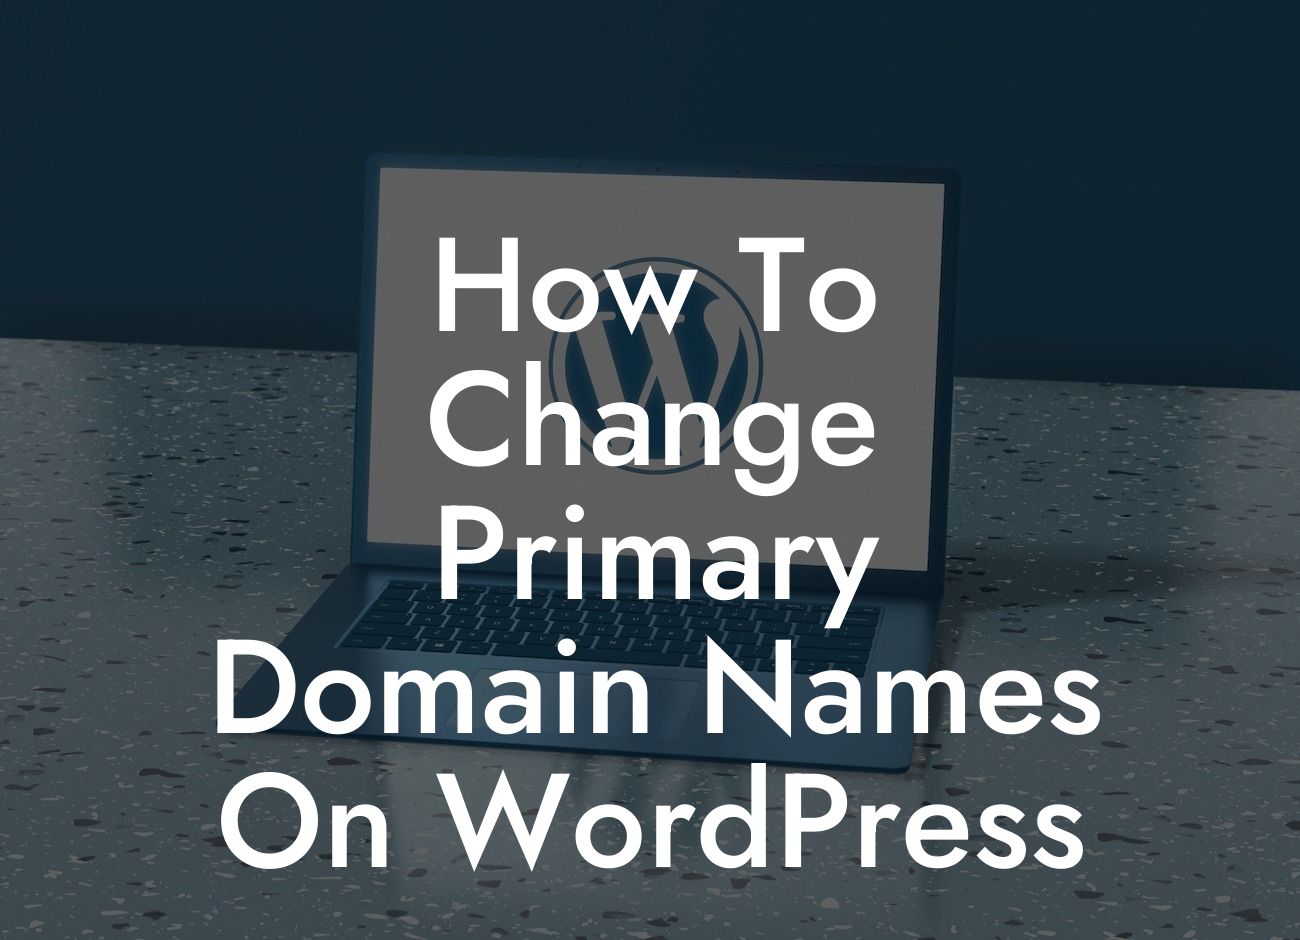 How To Change Primary Domain Names On WordPress